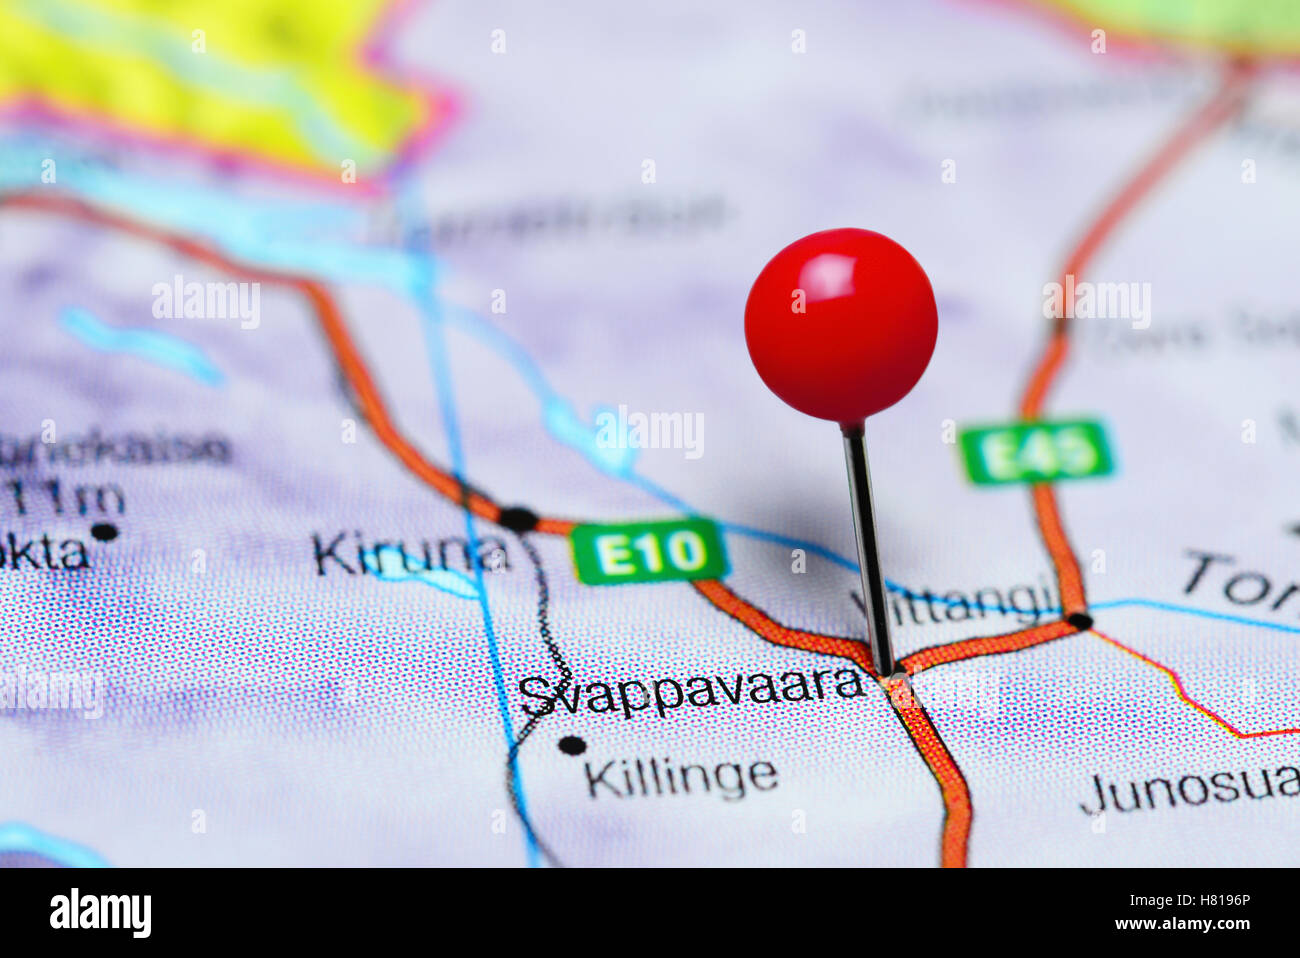 Svappavaara pinned on a map of Sweden Stock Photo